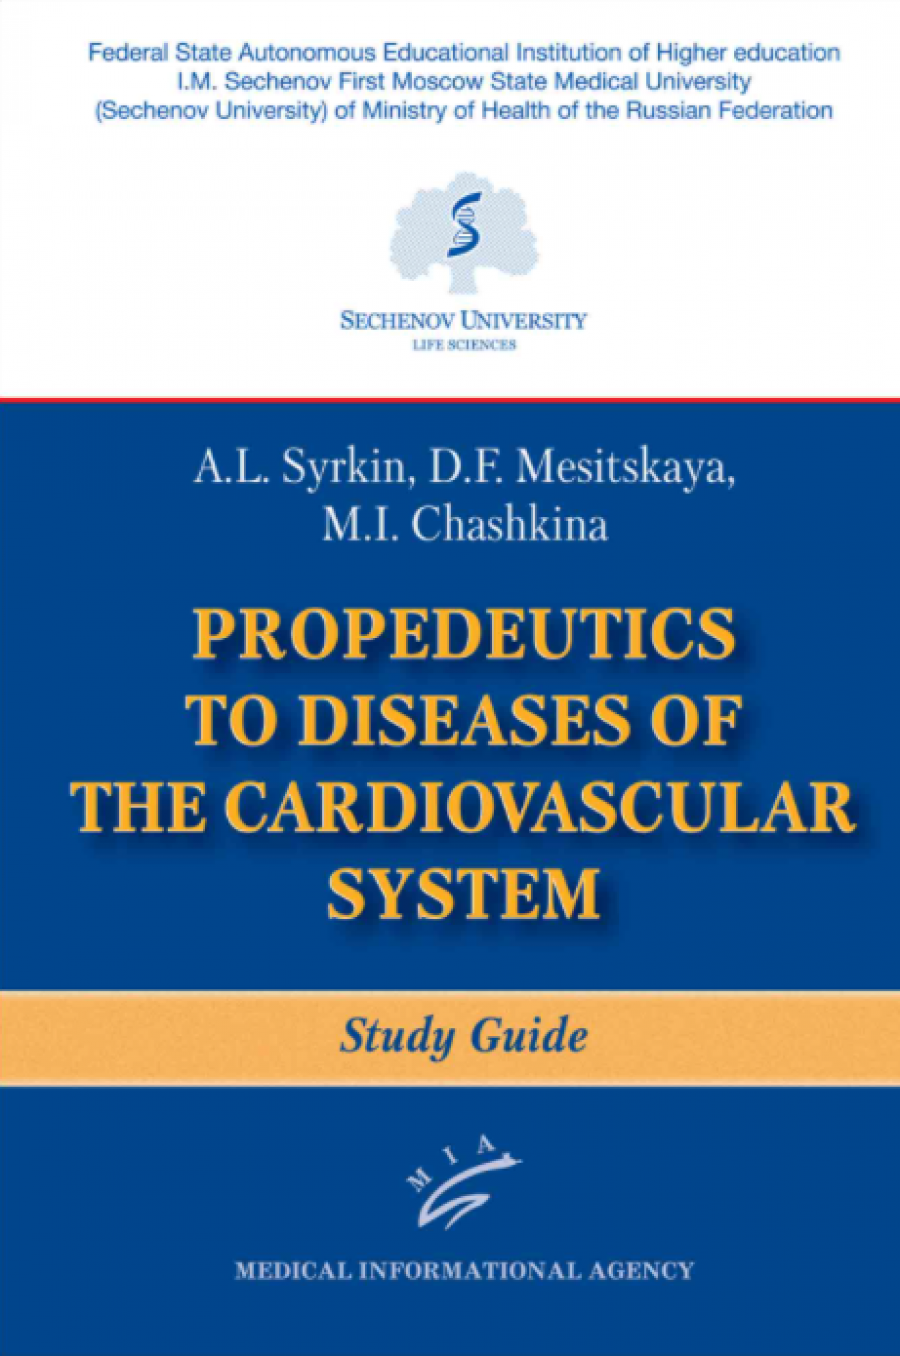  ..,  ..,  .. Propaedeutics to Diseases of the Cardiovascular System 